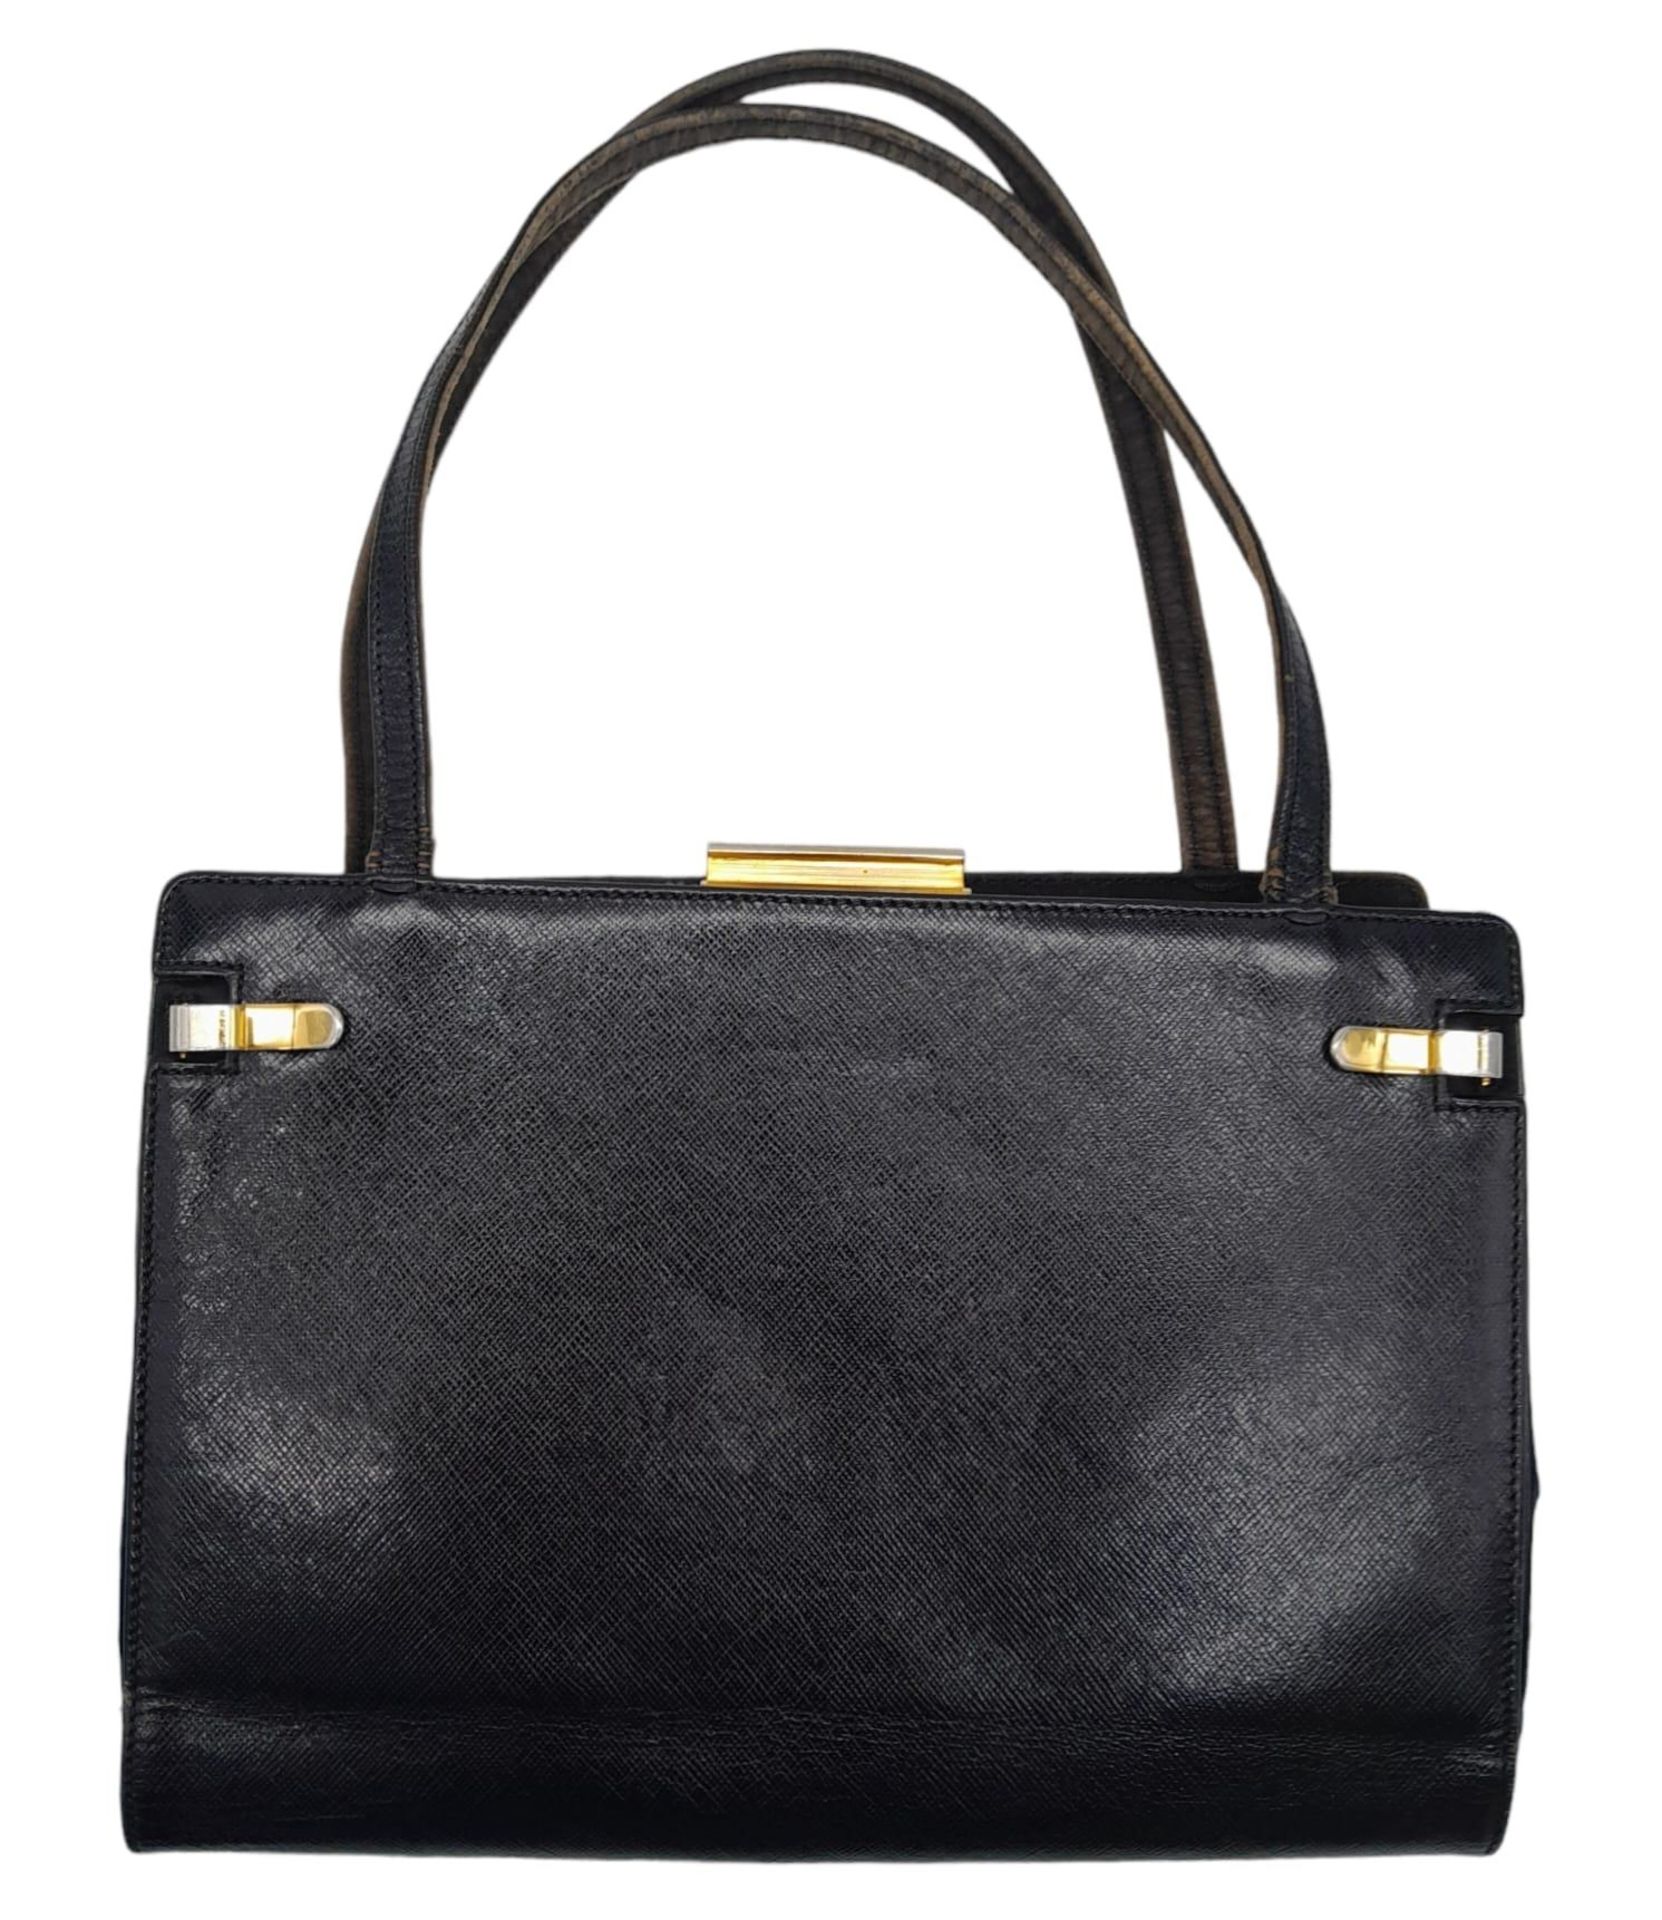 A Gucci Black Hand Bag. Leather exterior with gold-toned hardware, two thin straps, and clasp